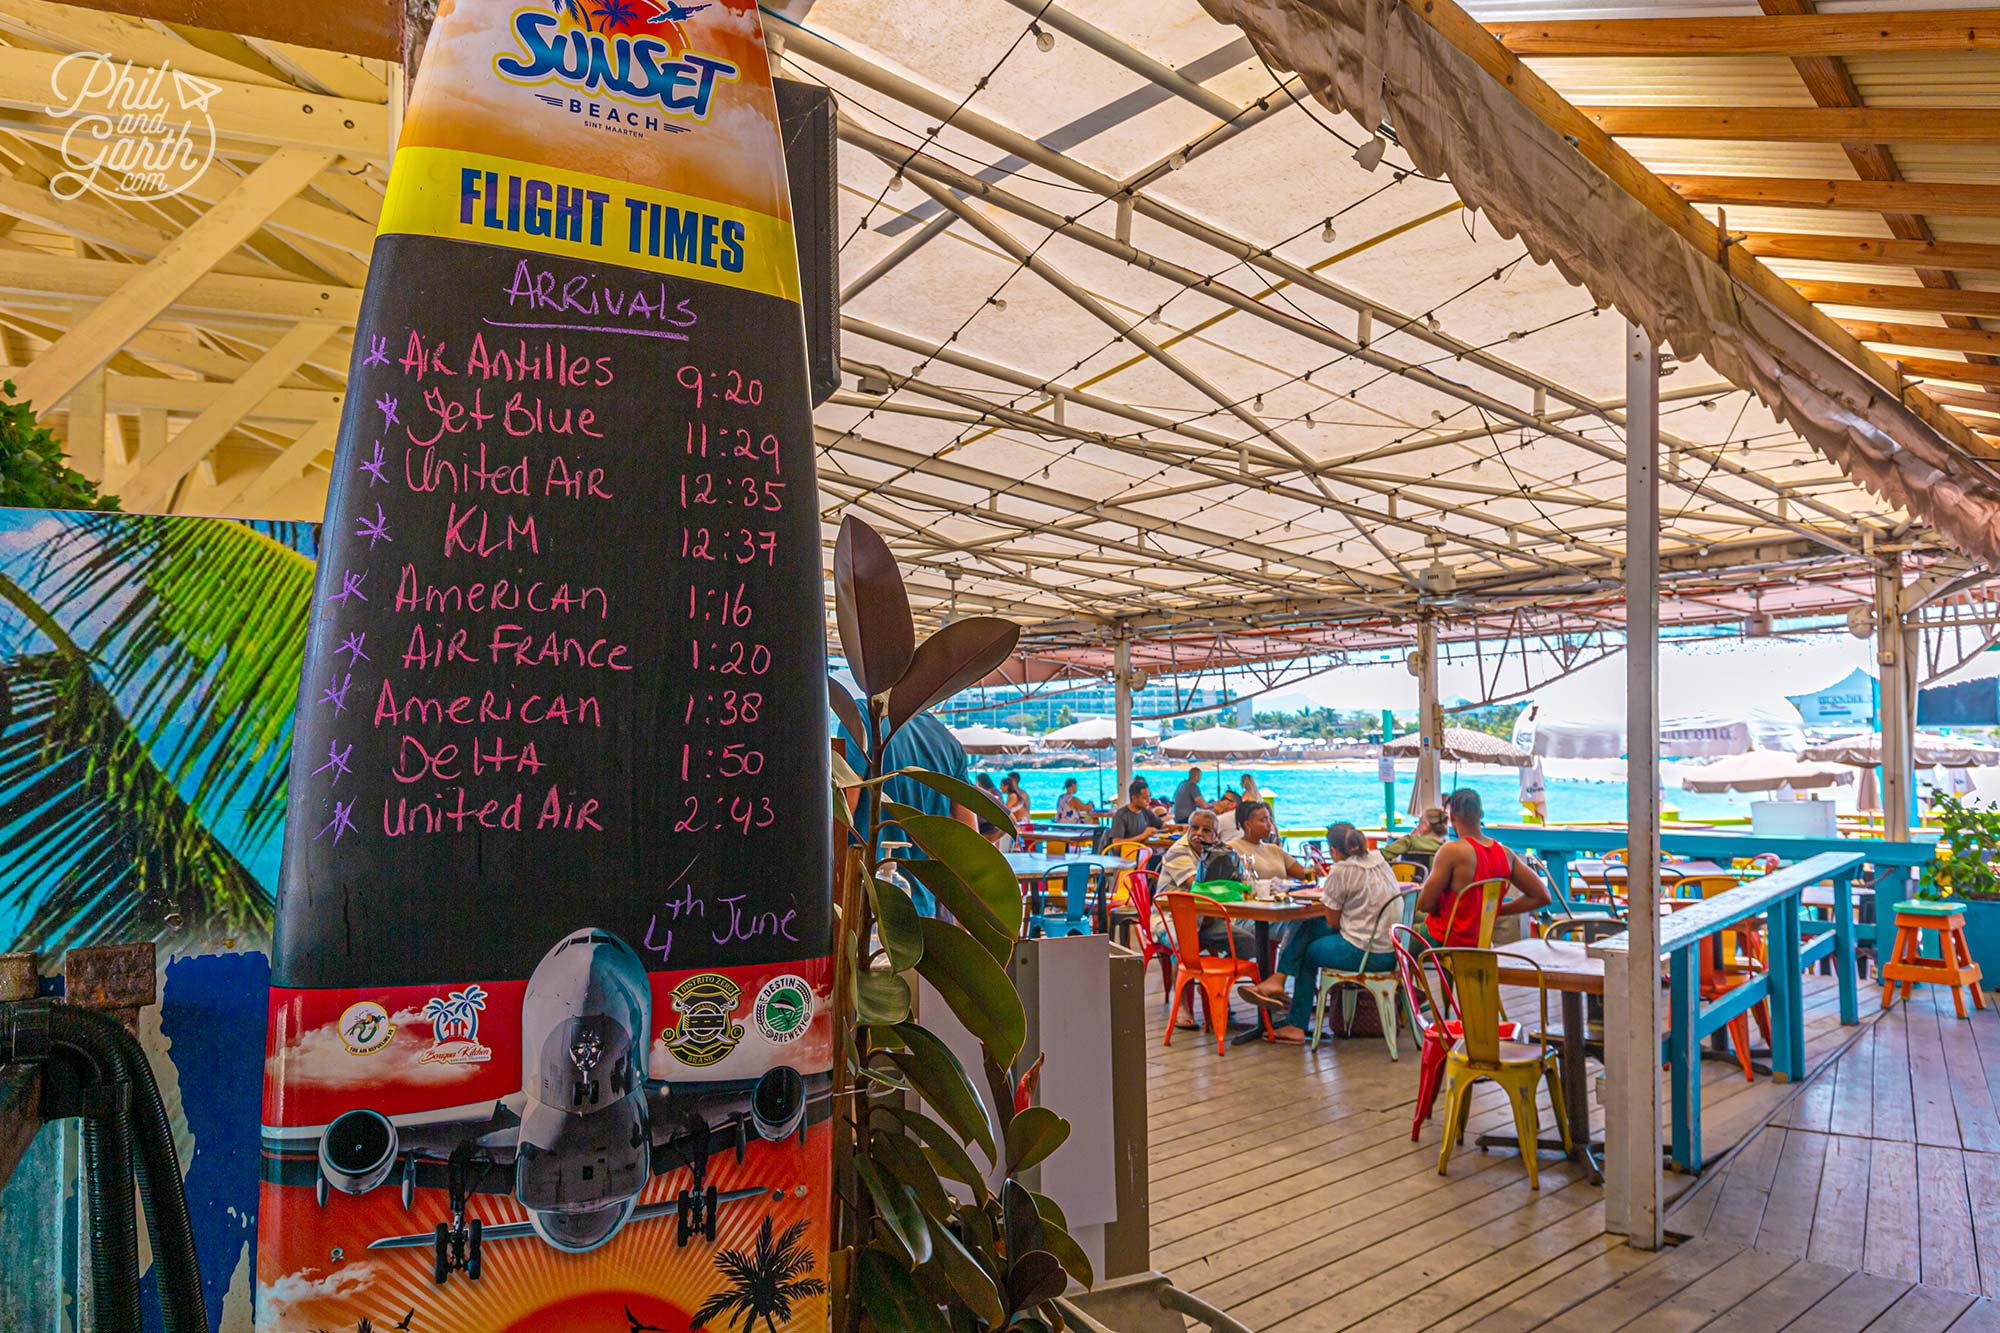 The Sunset Beach Bar posts times of flight arrivals on a surfboard at the entrance